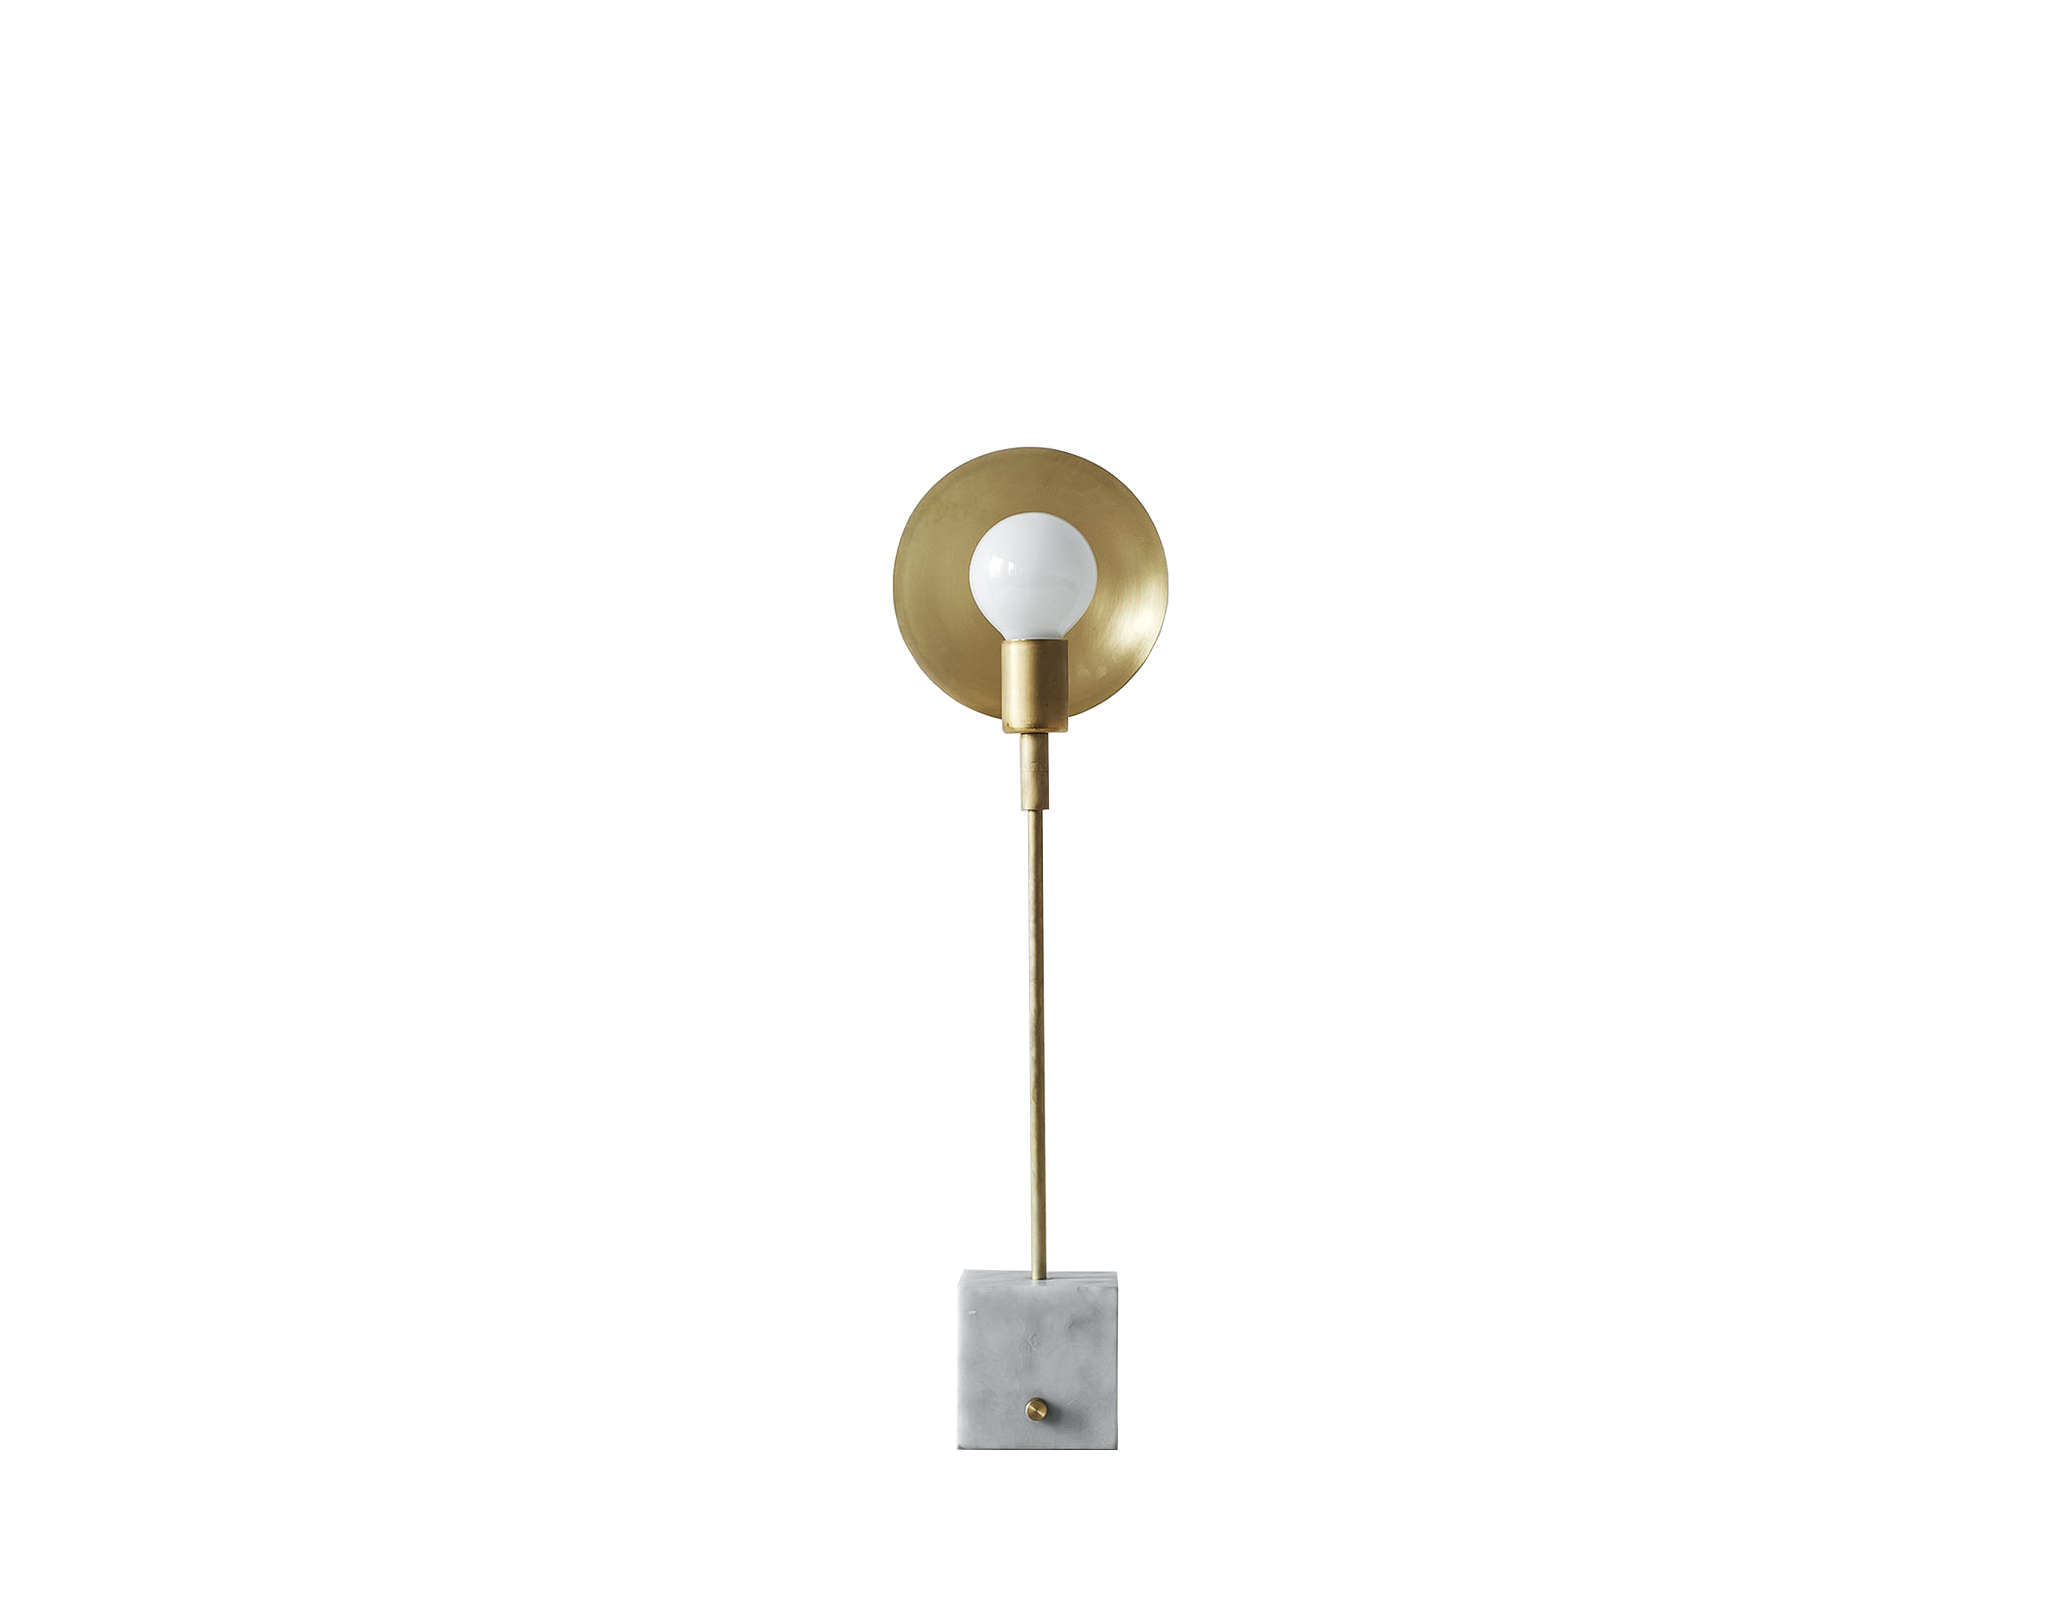 lamp clipart top view